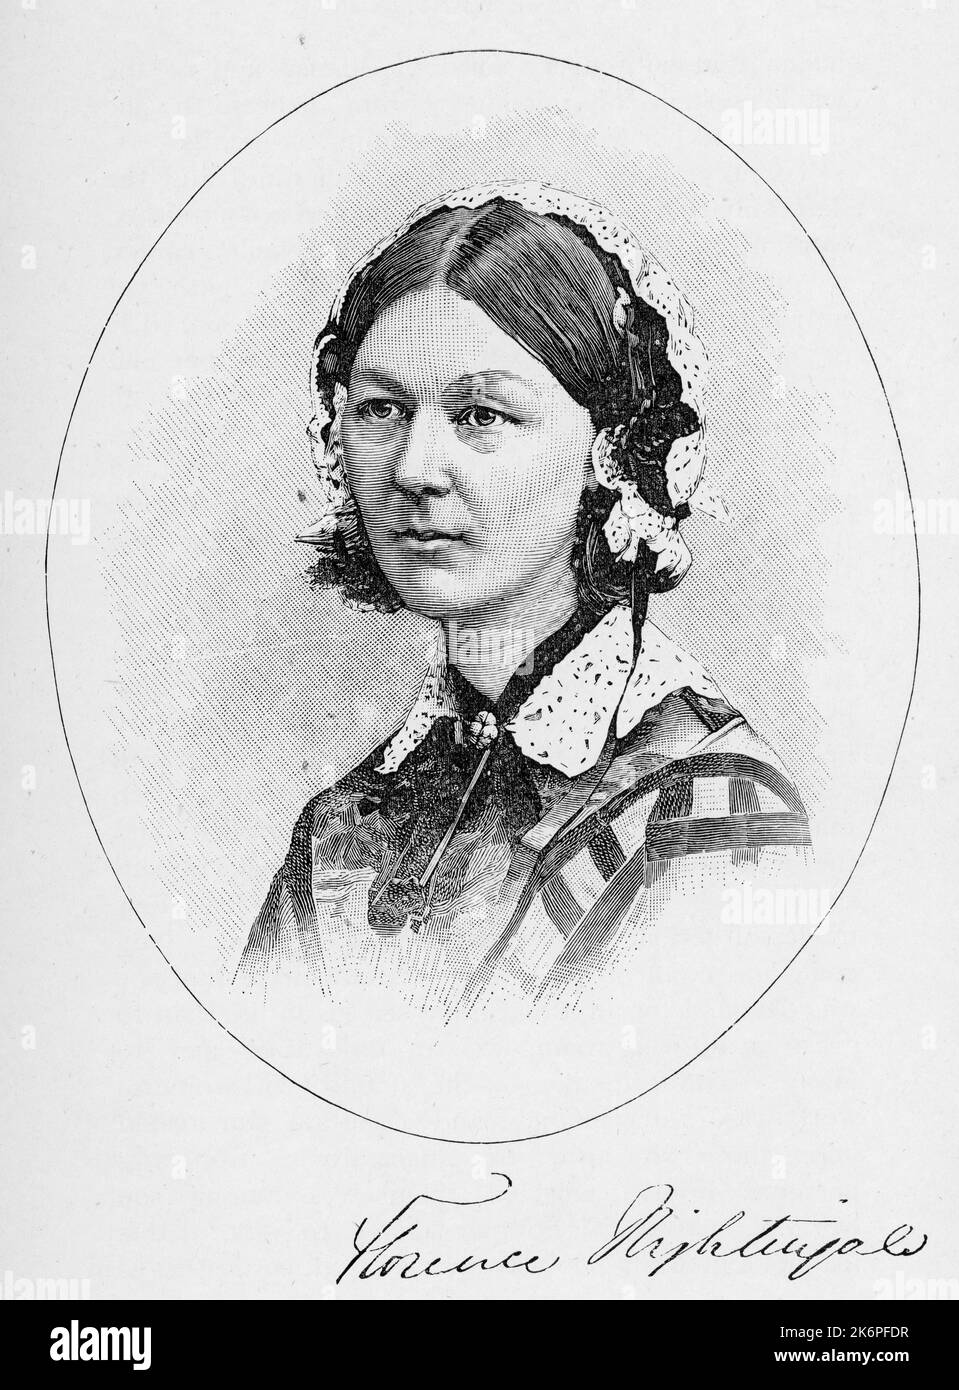 Florence Nightingale (1820-1910), 19th century. Famed for her work during the Crimean War, where she gained the title of 'The Lady With the Lamp', Nightingale is also revered for having laid the foundations of professional nursing with the establishment of her nursing school at St Thomas's Hospital in London. Stock Photo